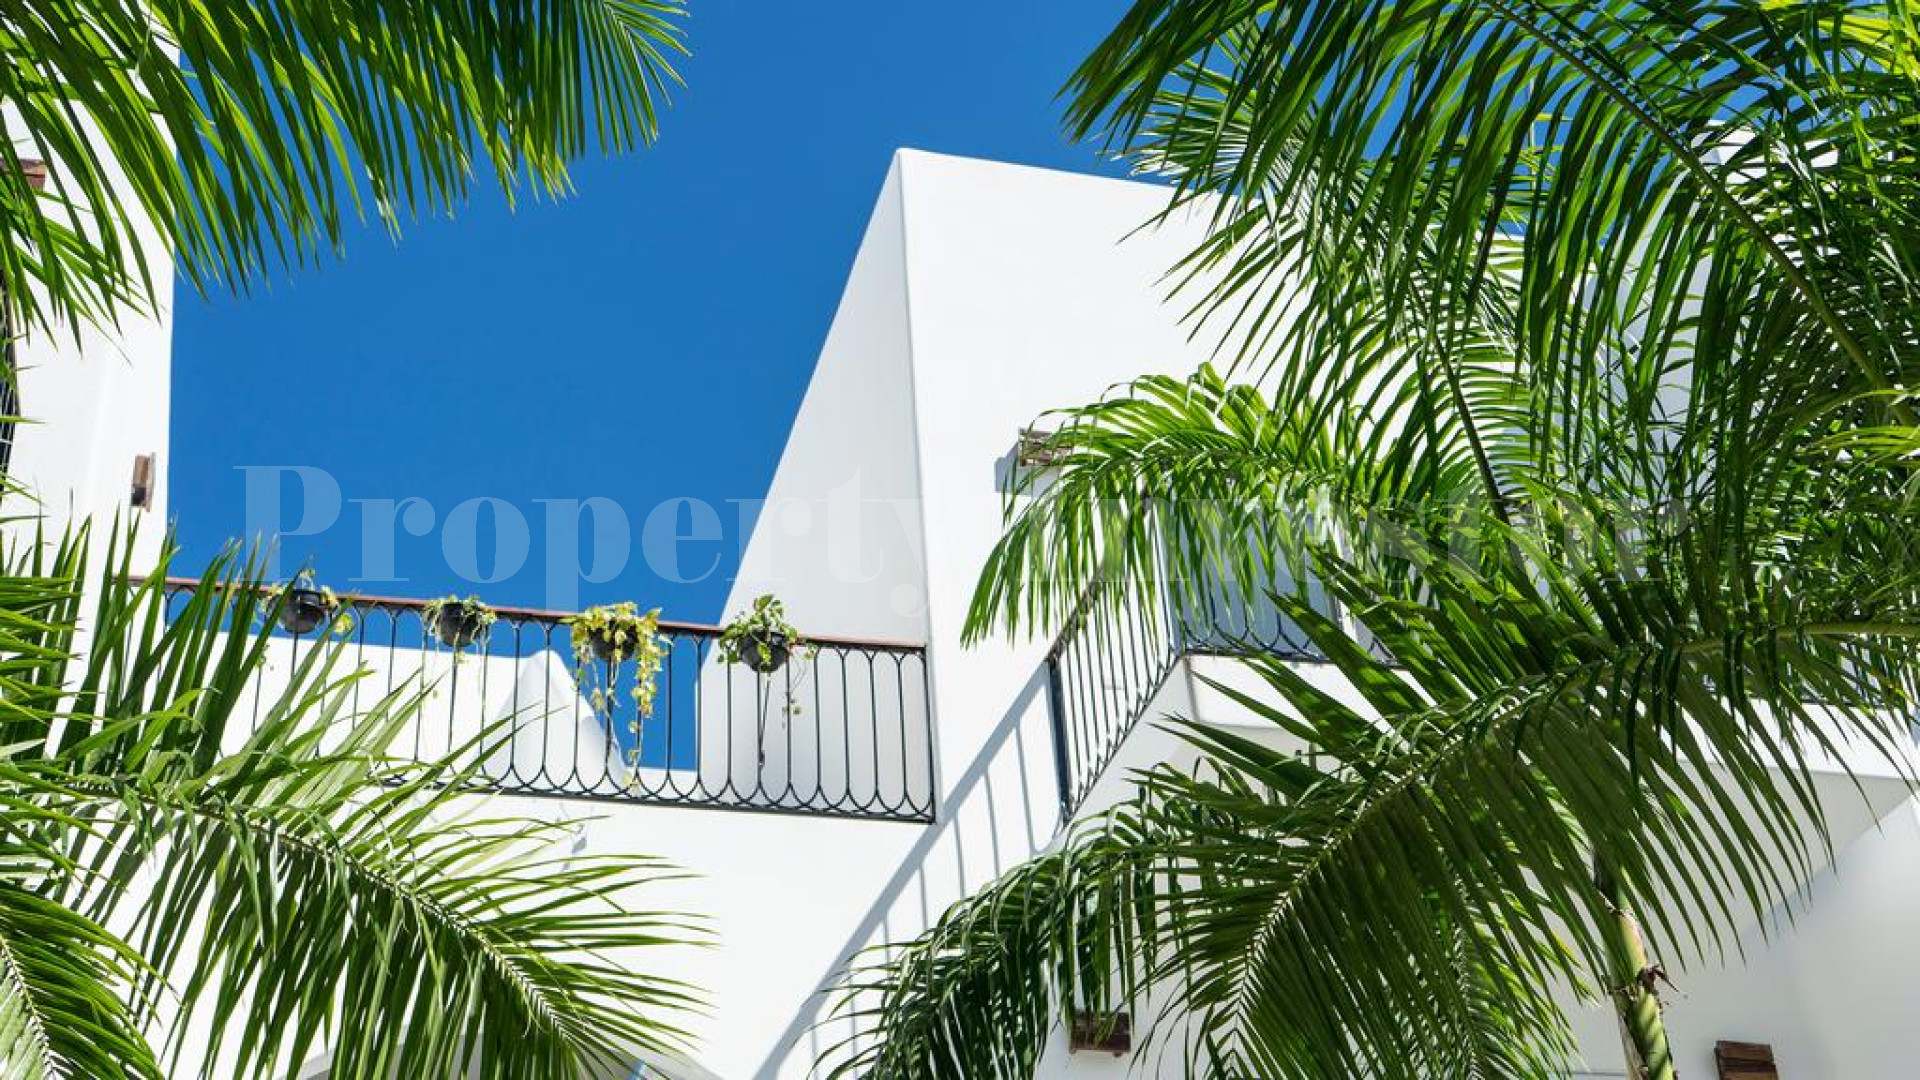 Chic 20 Room Boutique Hotel for Sale Located in Increasingly Popular Area of Tulum, Mexico